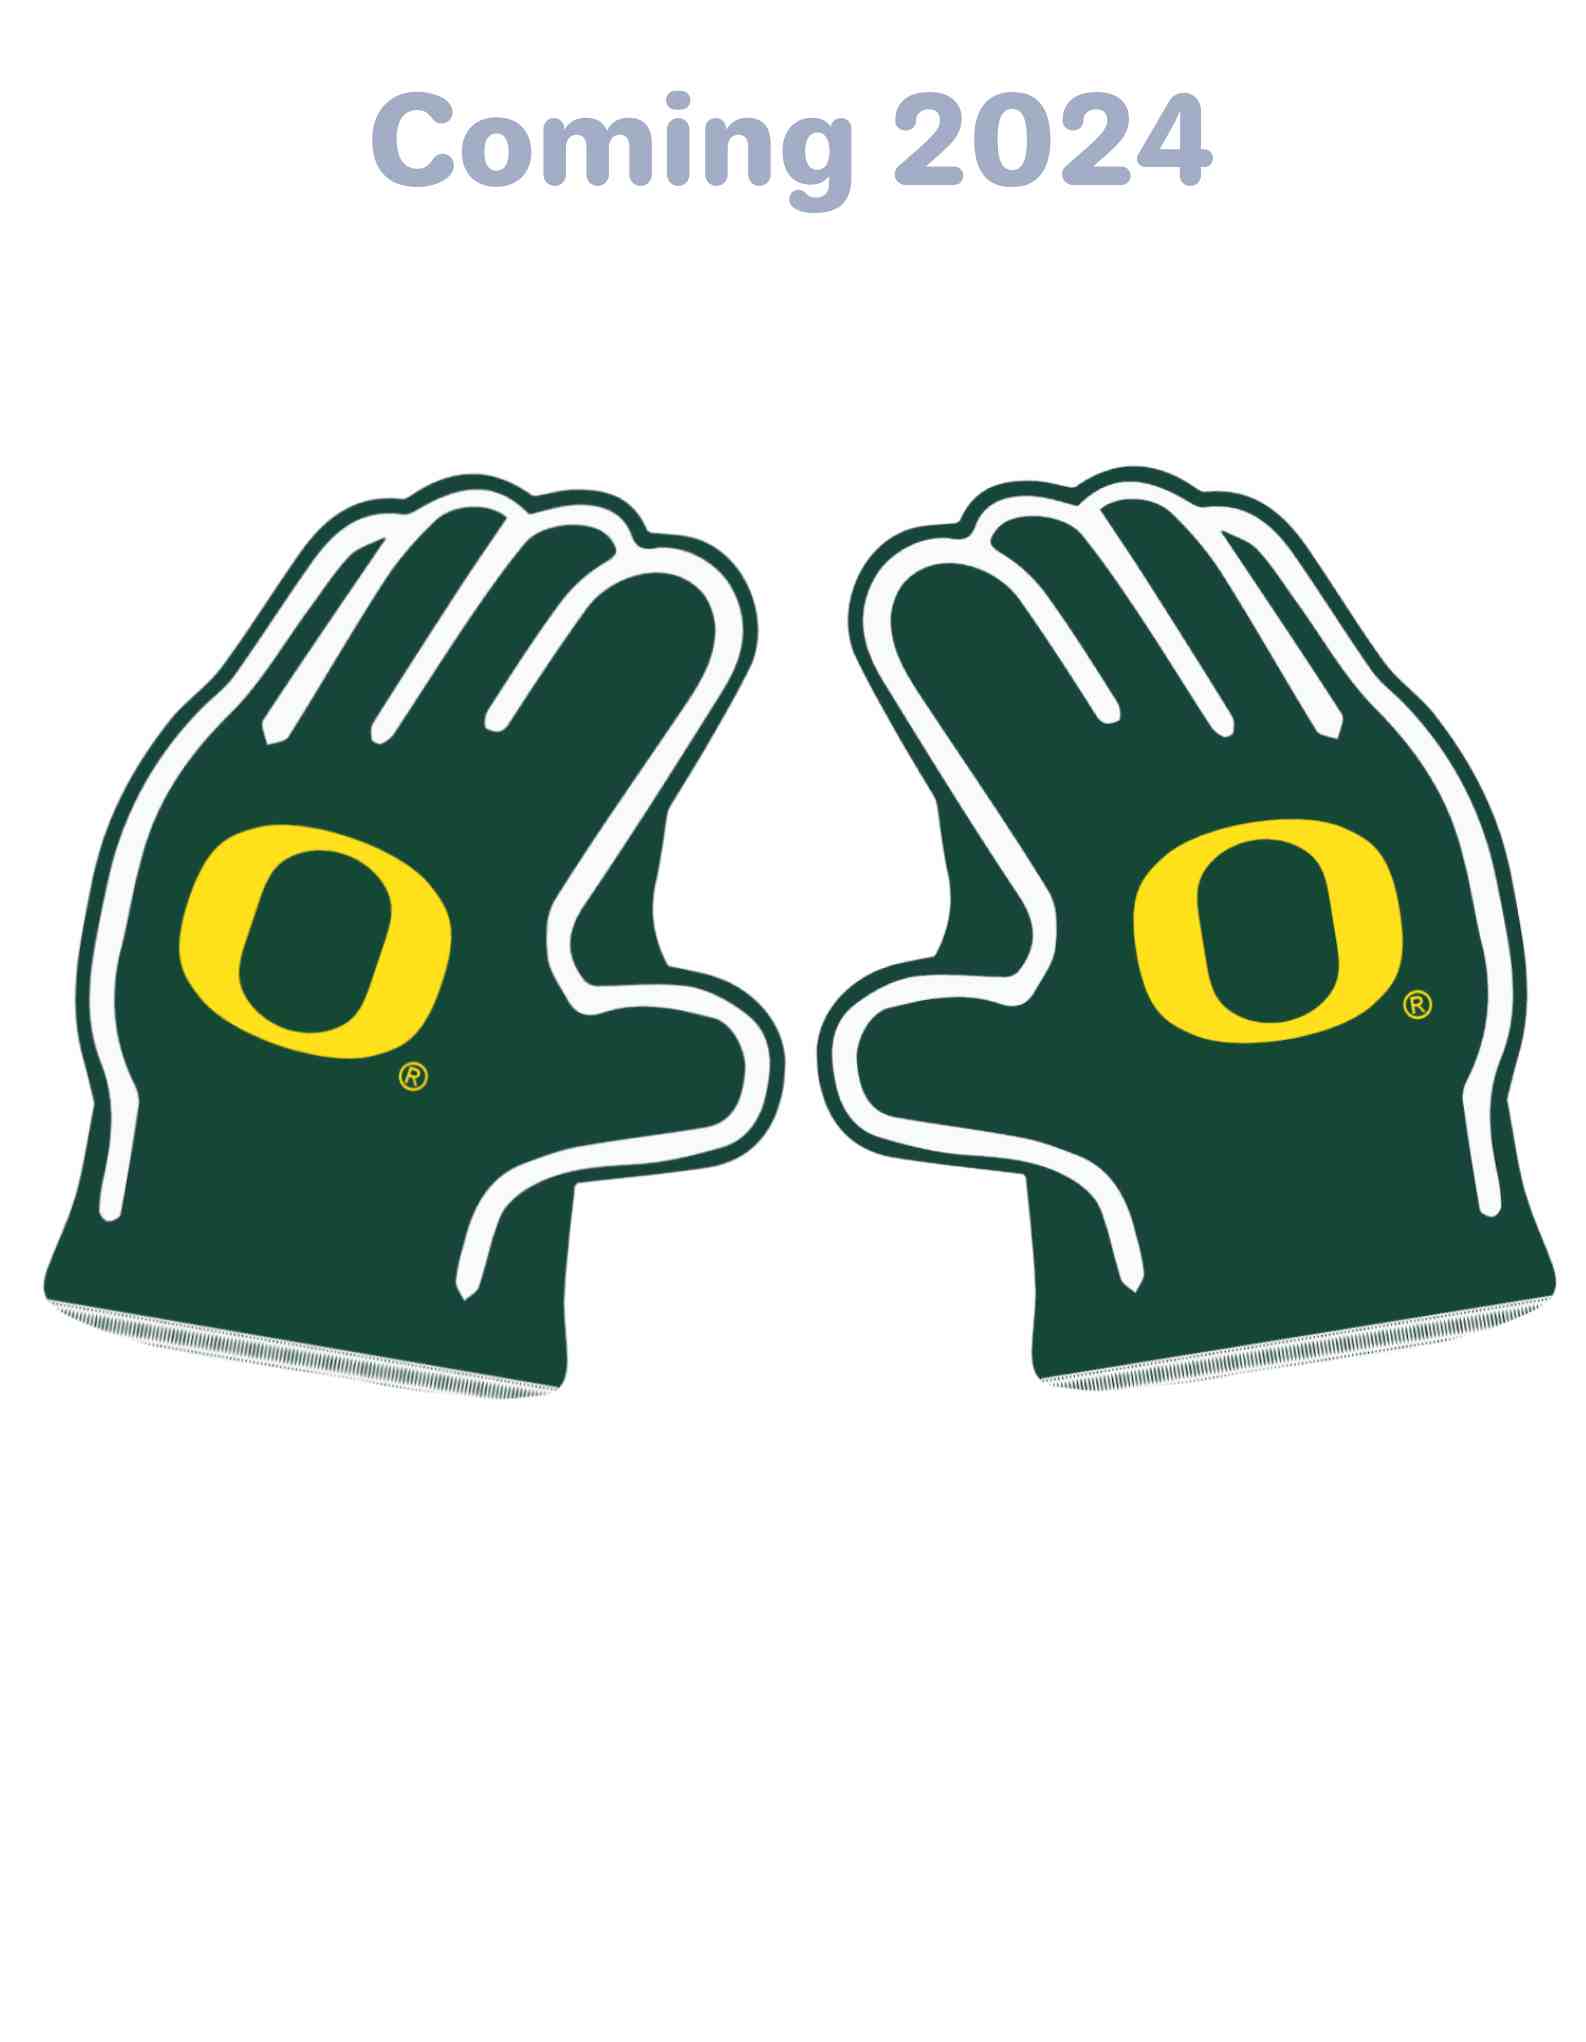 Oregon Win the Day FanMitts Baby Mittens Green Back Pair